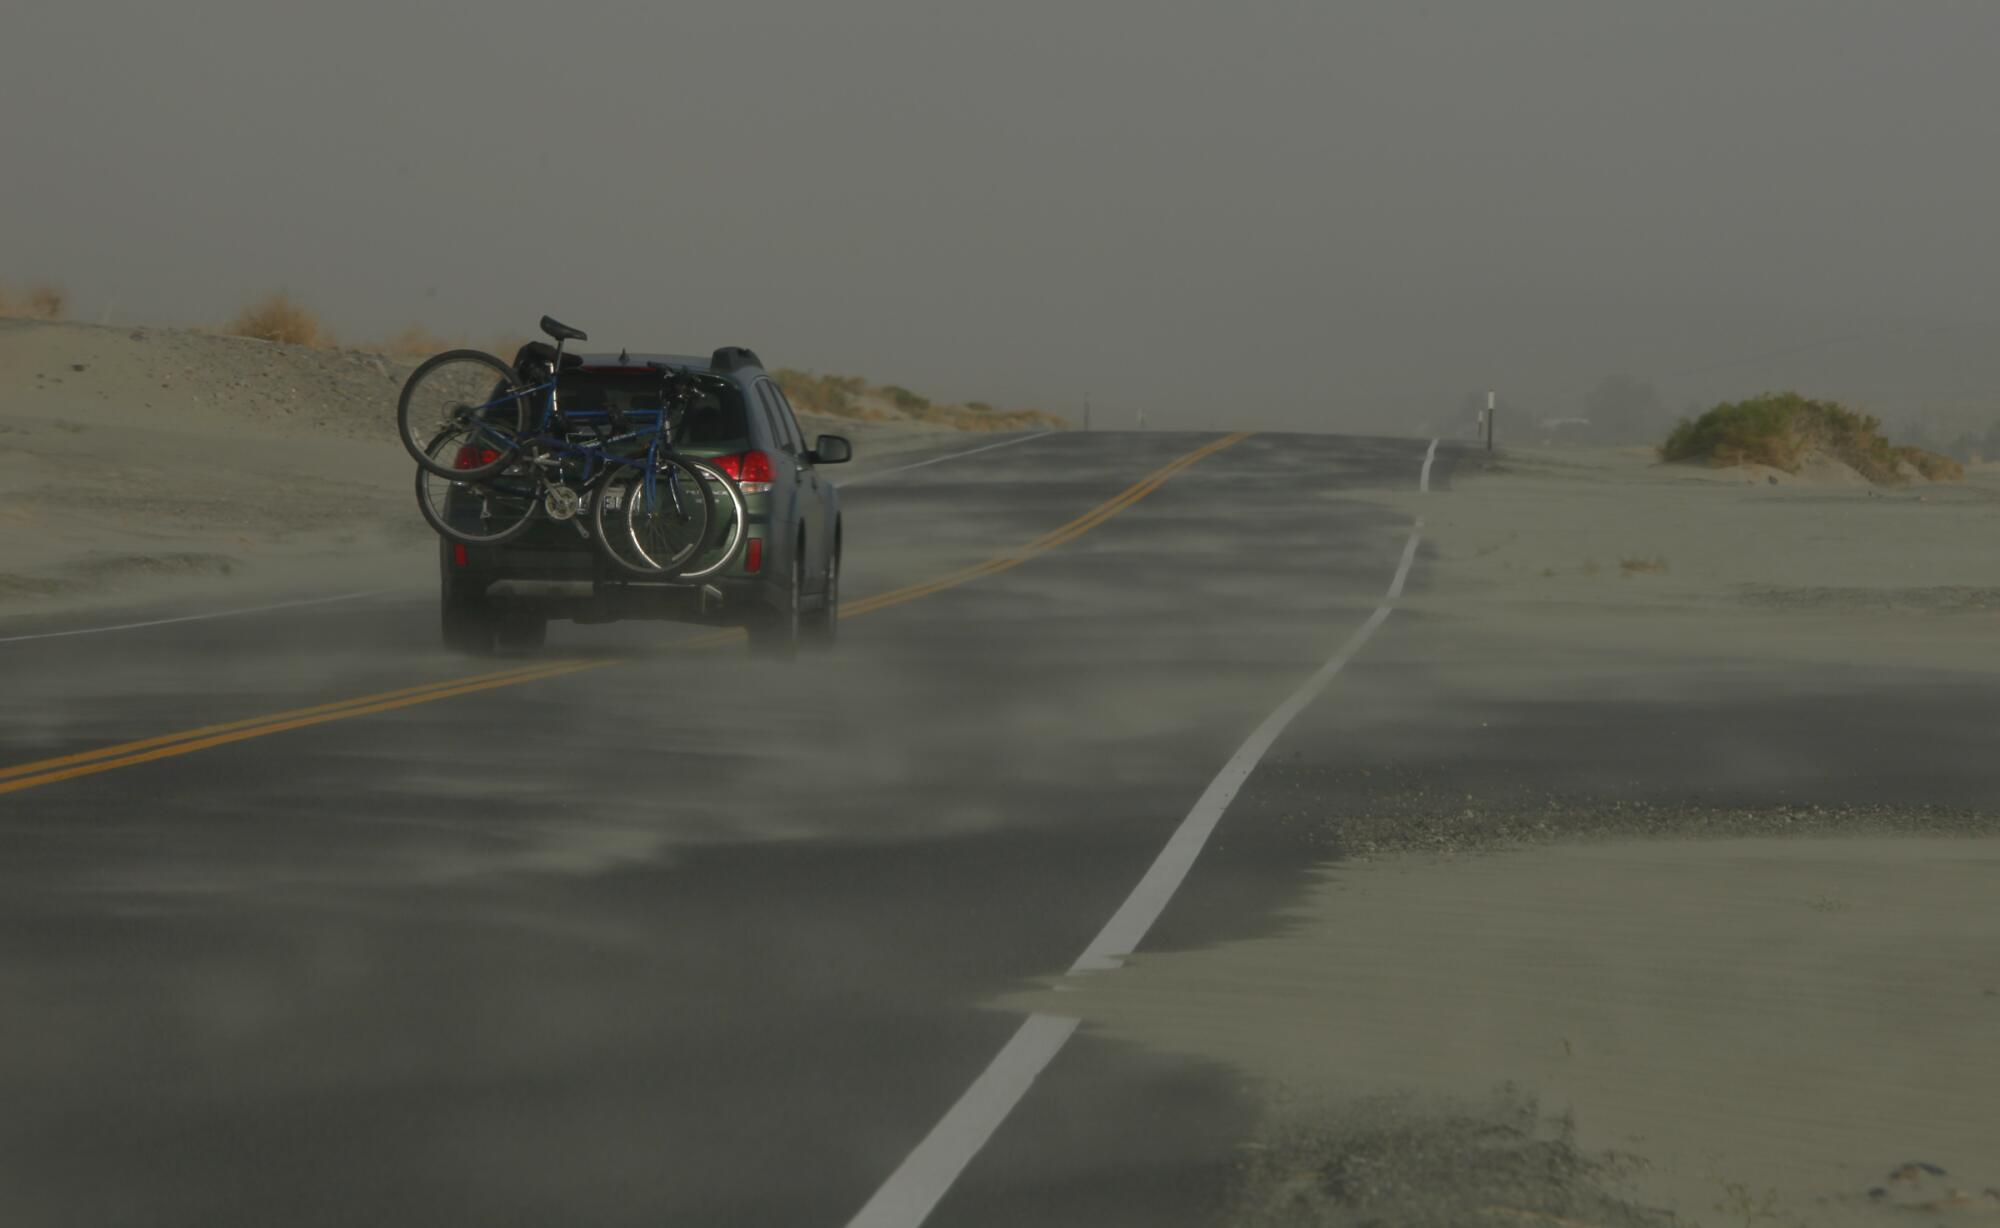 The roadway along old Highway 136 heading to Keeler, Calif., is obscured by drifting dust.